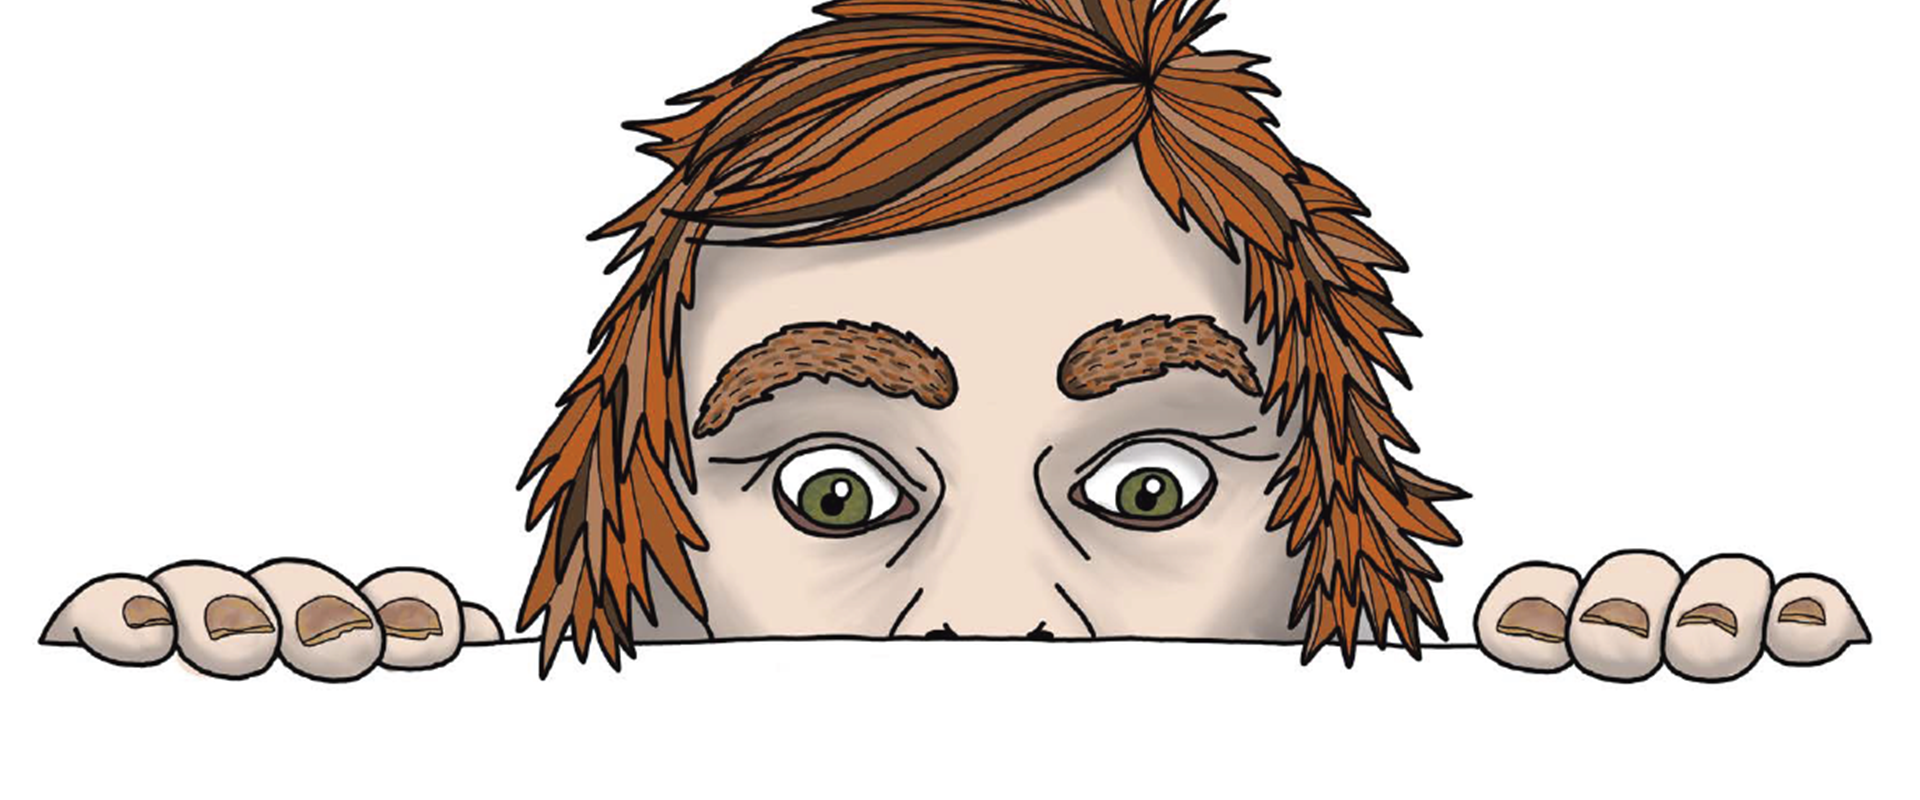 Illustration of a giant's face peeking over a surface.